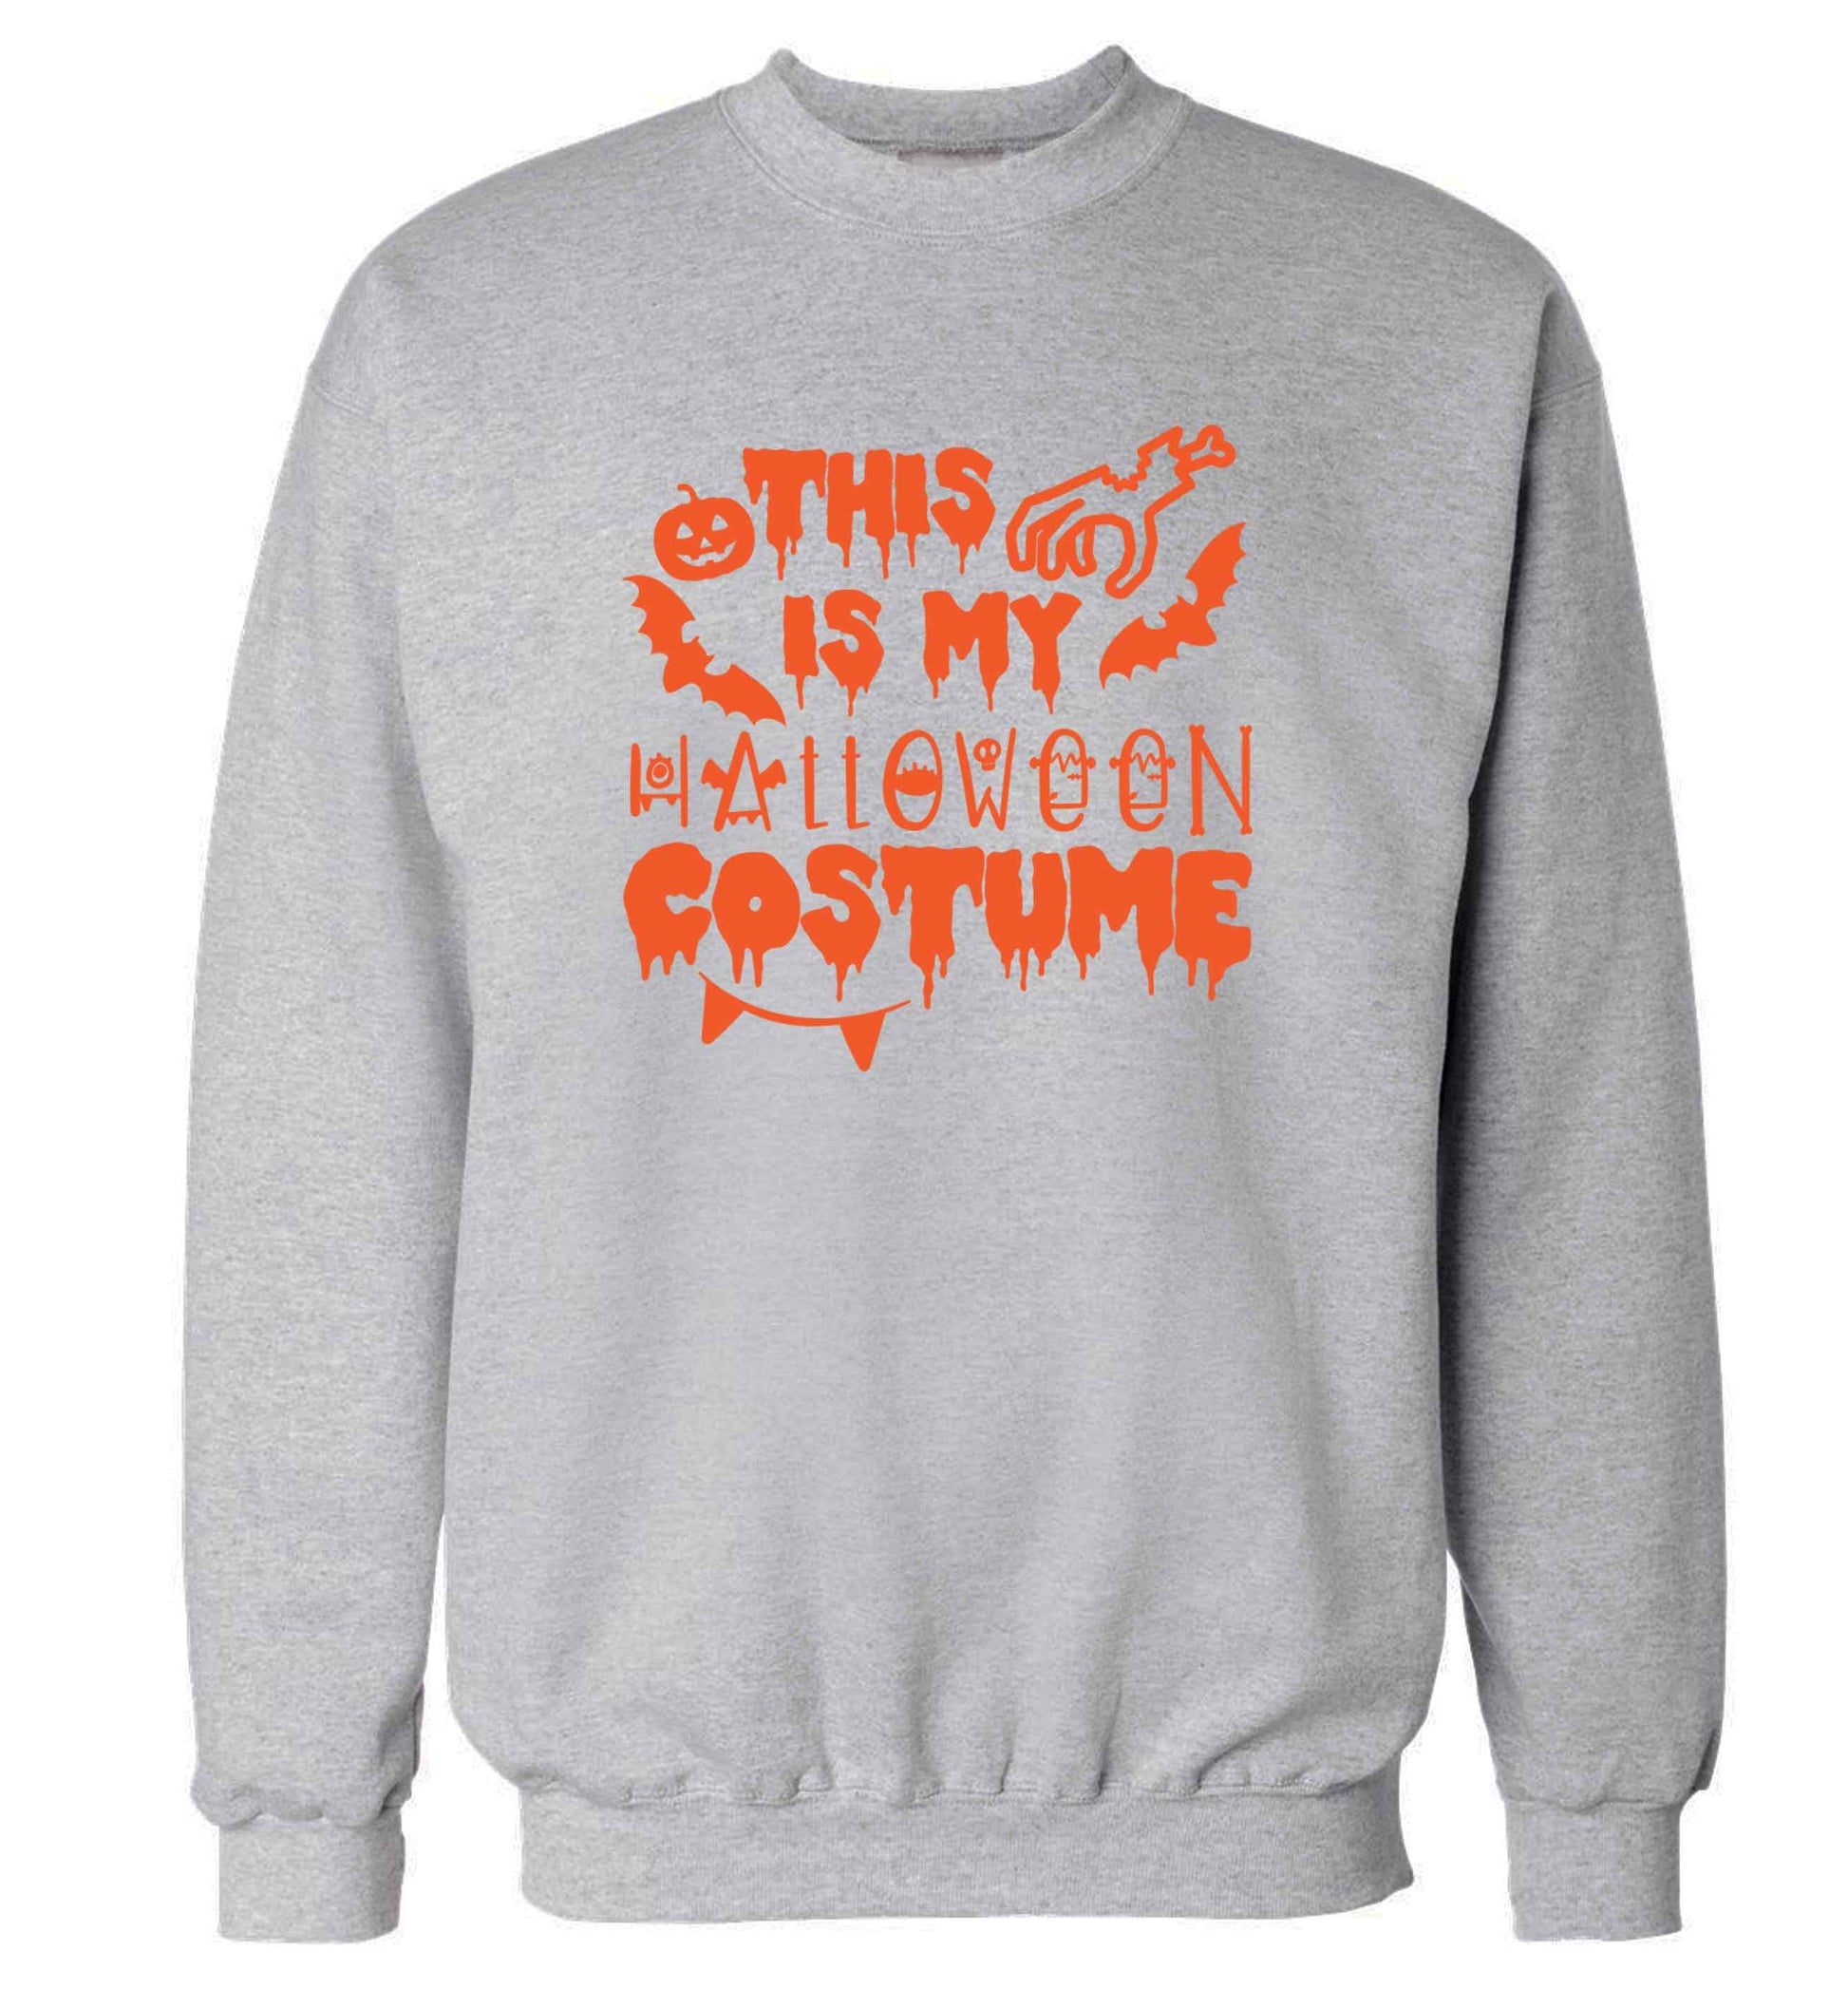 This is my halloween costume adult's unisex grey sweater 2XL